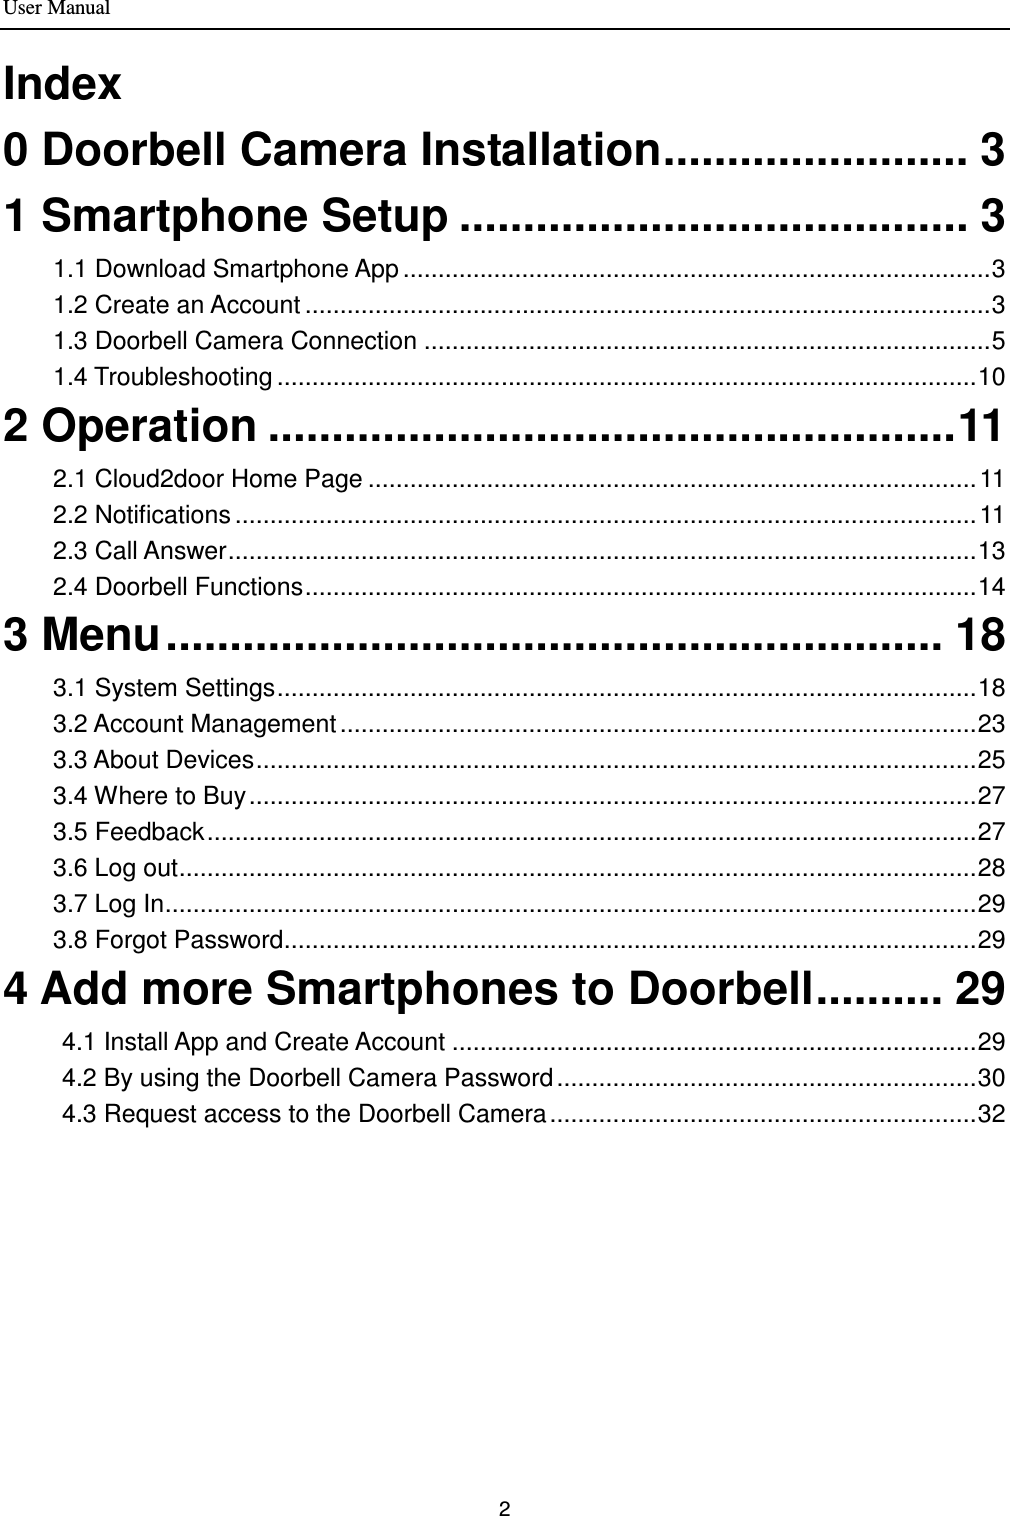 User Manual 2  Index 0 Doorbell Camera Installation........................ 3 1 Smartphone Setup ........................................ 3 1.1 Download Smartphone App ....................................................................................3 1.2 Create an Account ..................................................................................................3 1.3 Doorbell Camera Connection .................................................................................5 1.4 Troubleshooting ....................................................................................................10 2 Operation ......................................................11 2.1 Cloud2door Home Page ....................................................................................... 11 2.2 Notifications .......................................................................................................... 11 2.3 Call Answer...........................................................................................................13 2.4 Doorbell Functions................................................................................................14 3 Menu............................................................. 18 3.1 System Settings....................................................................................................18 3.2 Account Management...........................................................................................23 3.3 About Devices.......................................................................................................25 3.4 Where to Buy........................................................................................................27 3.5 Feedback..............................................................................................................27 3.6 Log out..................................................................................................................28 3.7 Log In....................................................................................................................29 3.8 Forgot Password...................................................................................................29 4 Add more Smartphones to Doorbell.......... 29 4.1 Install App and Create Account ...........................................................................29 4.2 By using the Doorbell Camera Password ............................................................30 4.3 Request access to the Doorbell Camera .............................................................32  